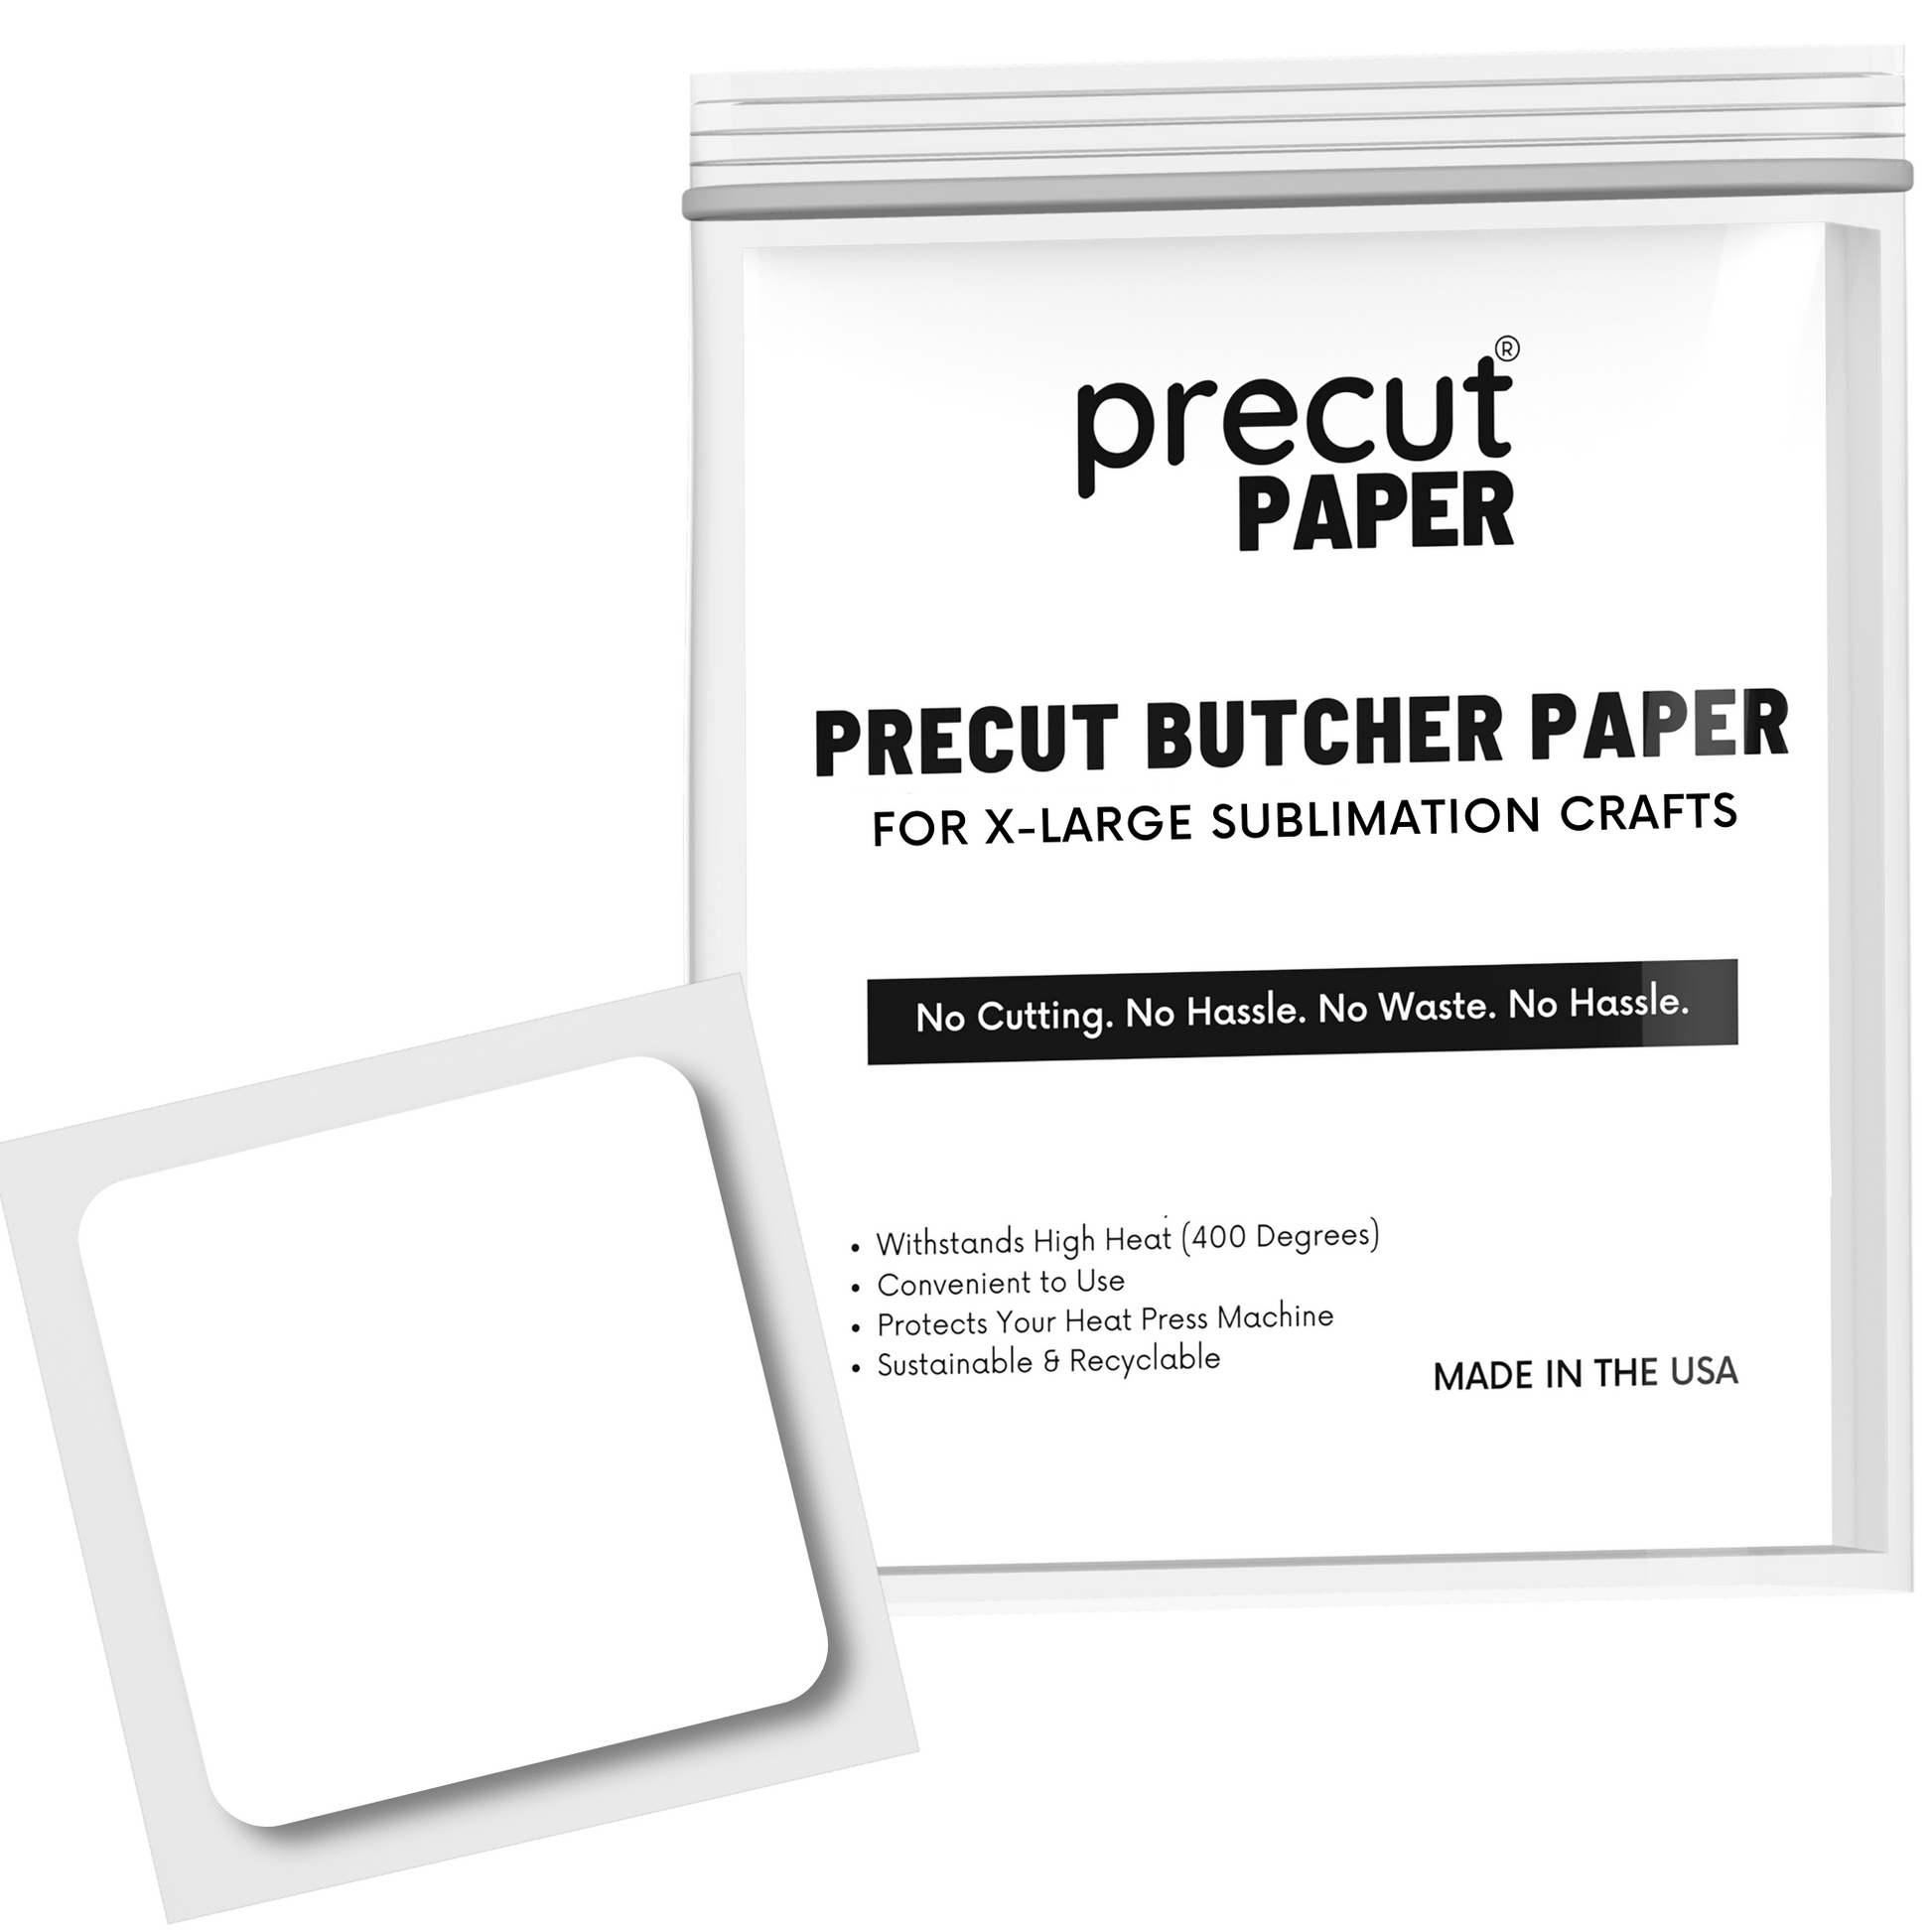 18” sublimation/butcher Paper roll cutter – We Sub'N